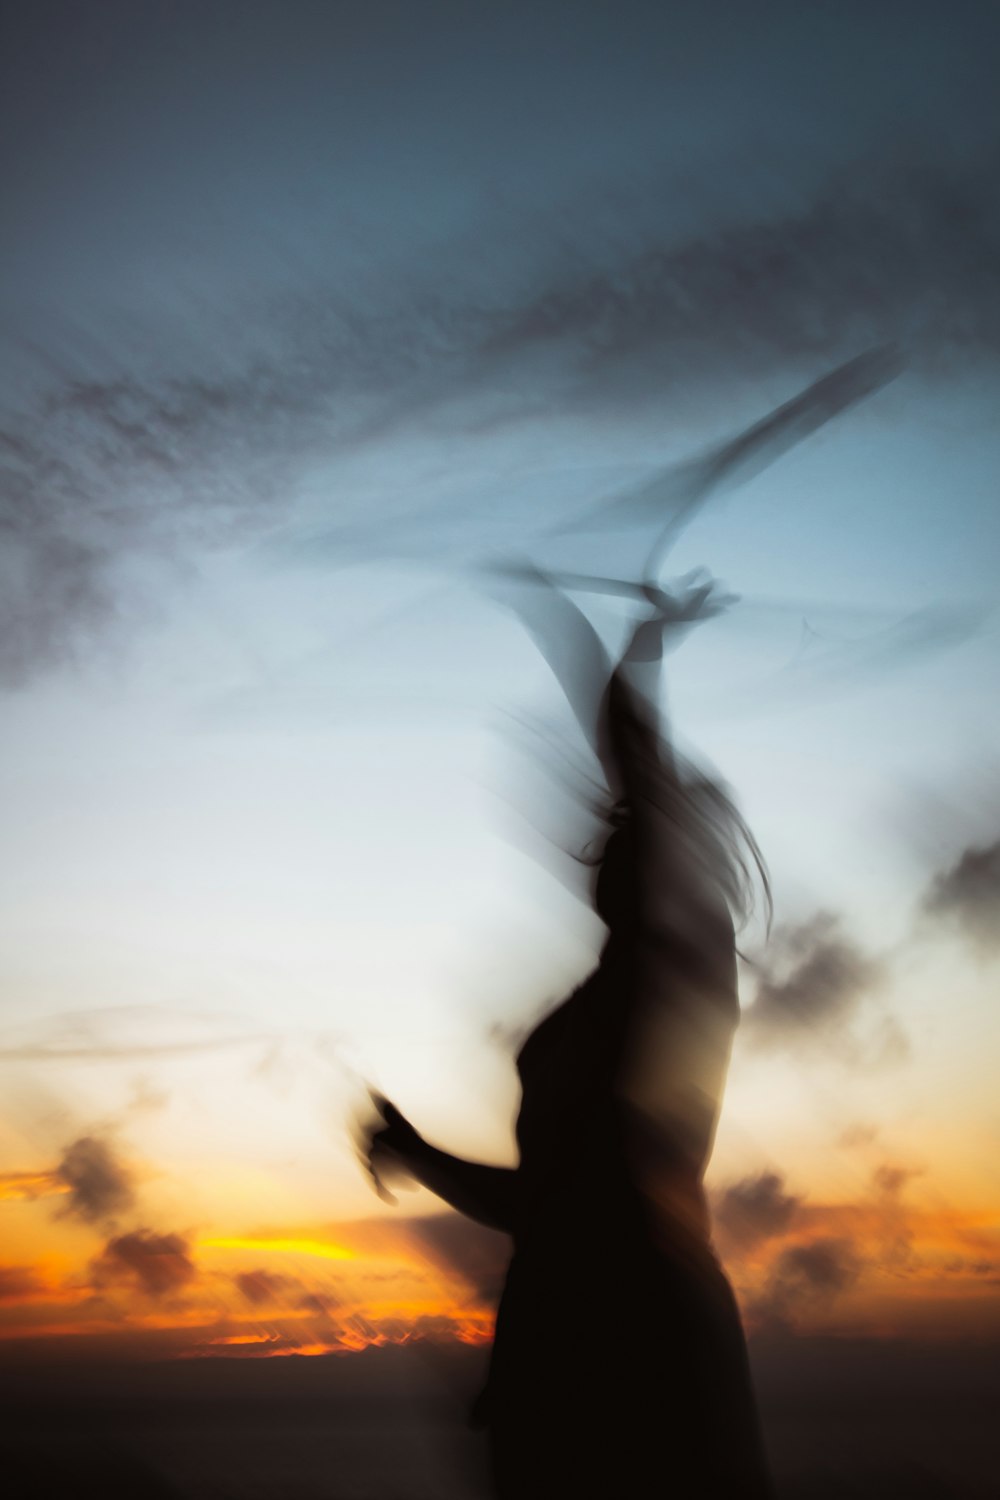 a blurry photo of a person holding a kite